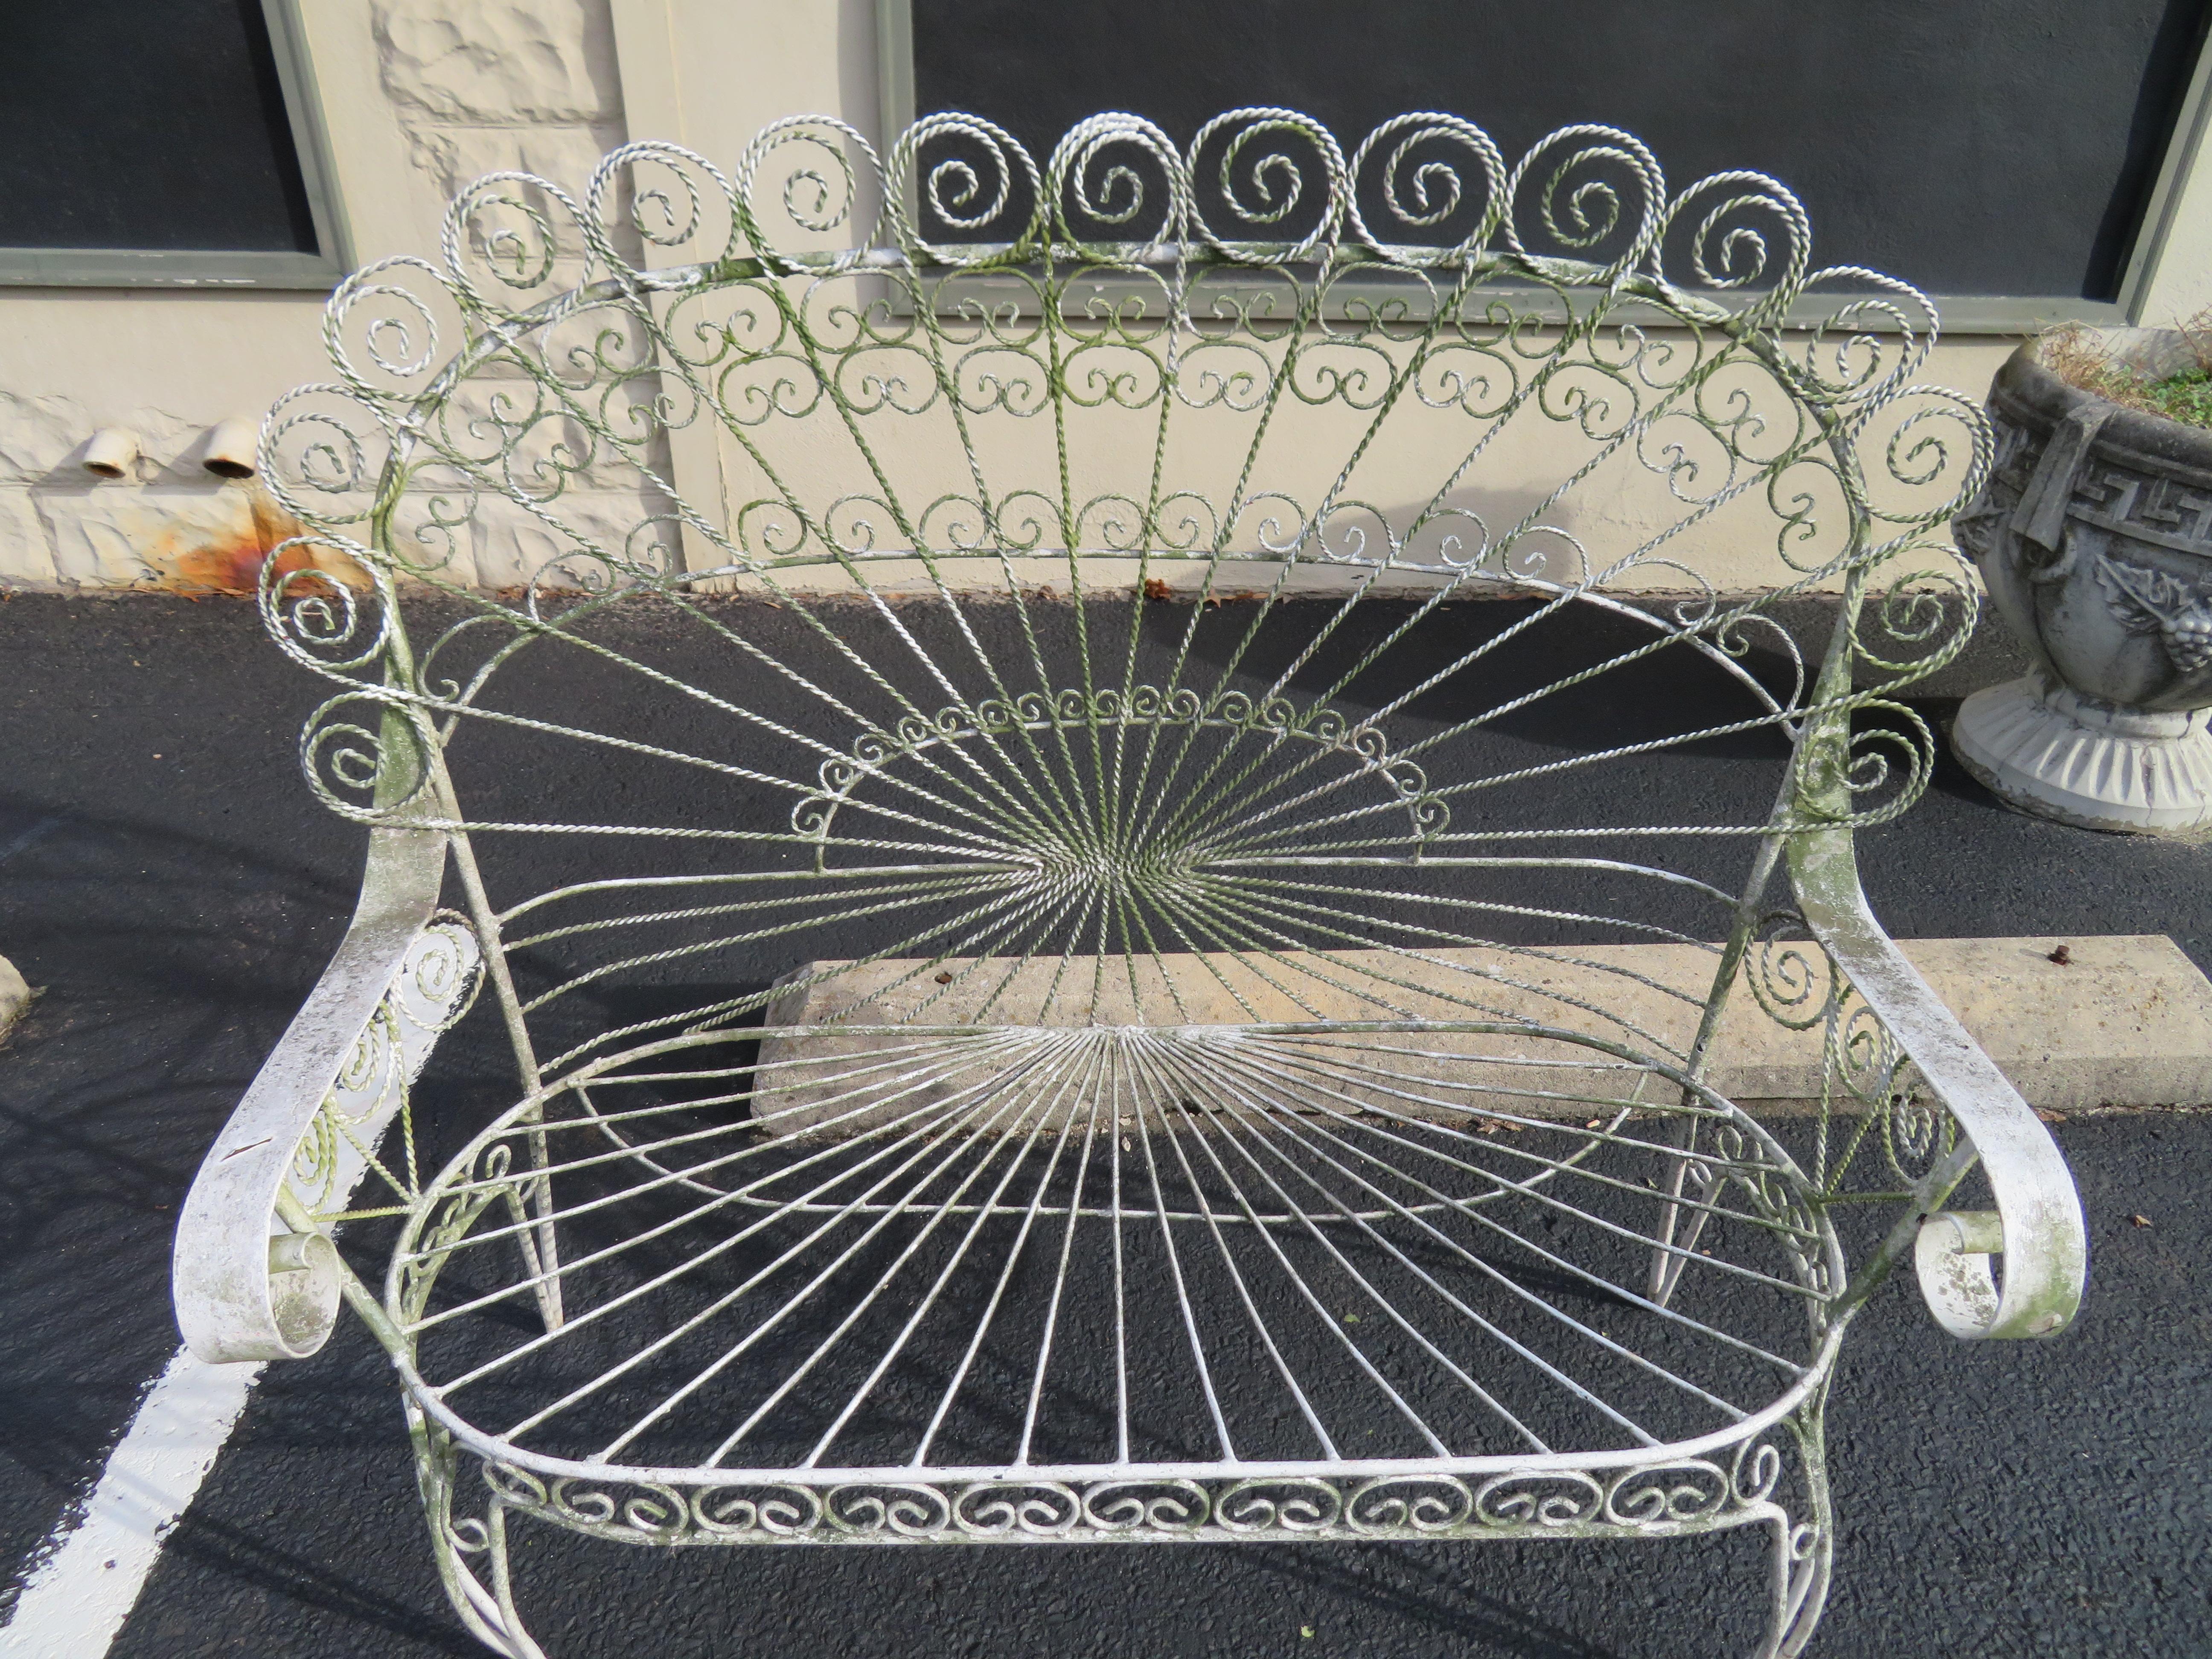 Gorgeous Salterini style ornate wrought iron twisted wire fan back patio bench. This piece is in vintage condition retaining it's original white finish with a lovely green lichen patina. There are no cracks or breaks to the frame-sturdy.